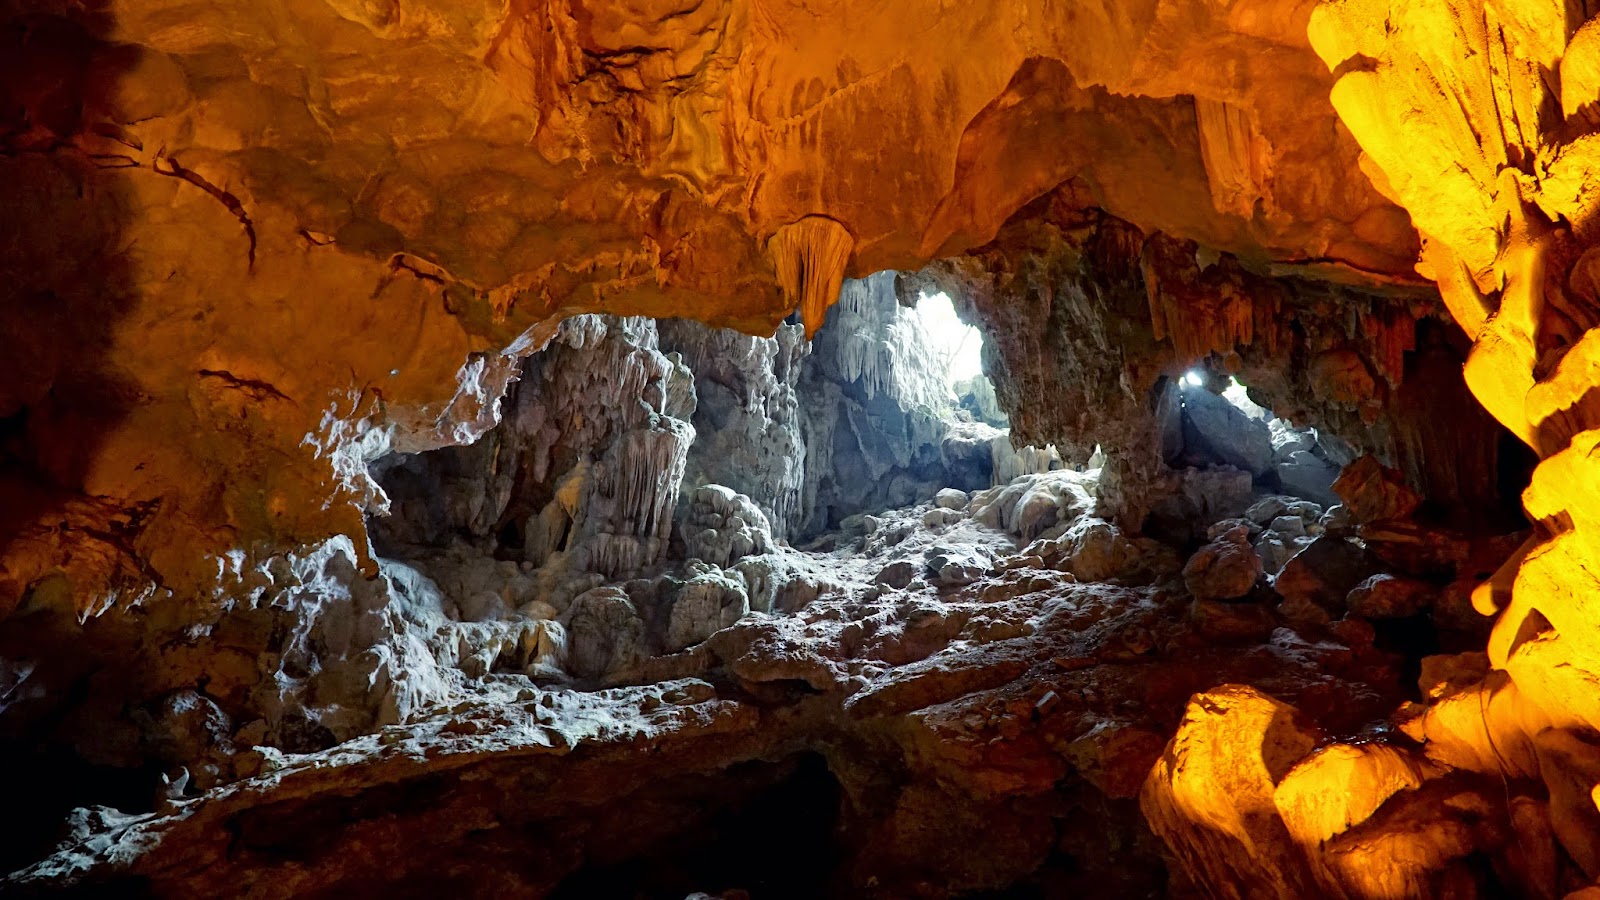 Cave opening at a different part of Thien Cung cave